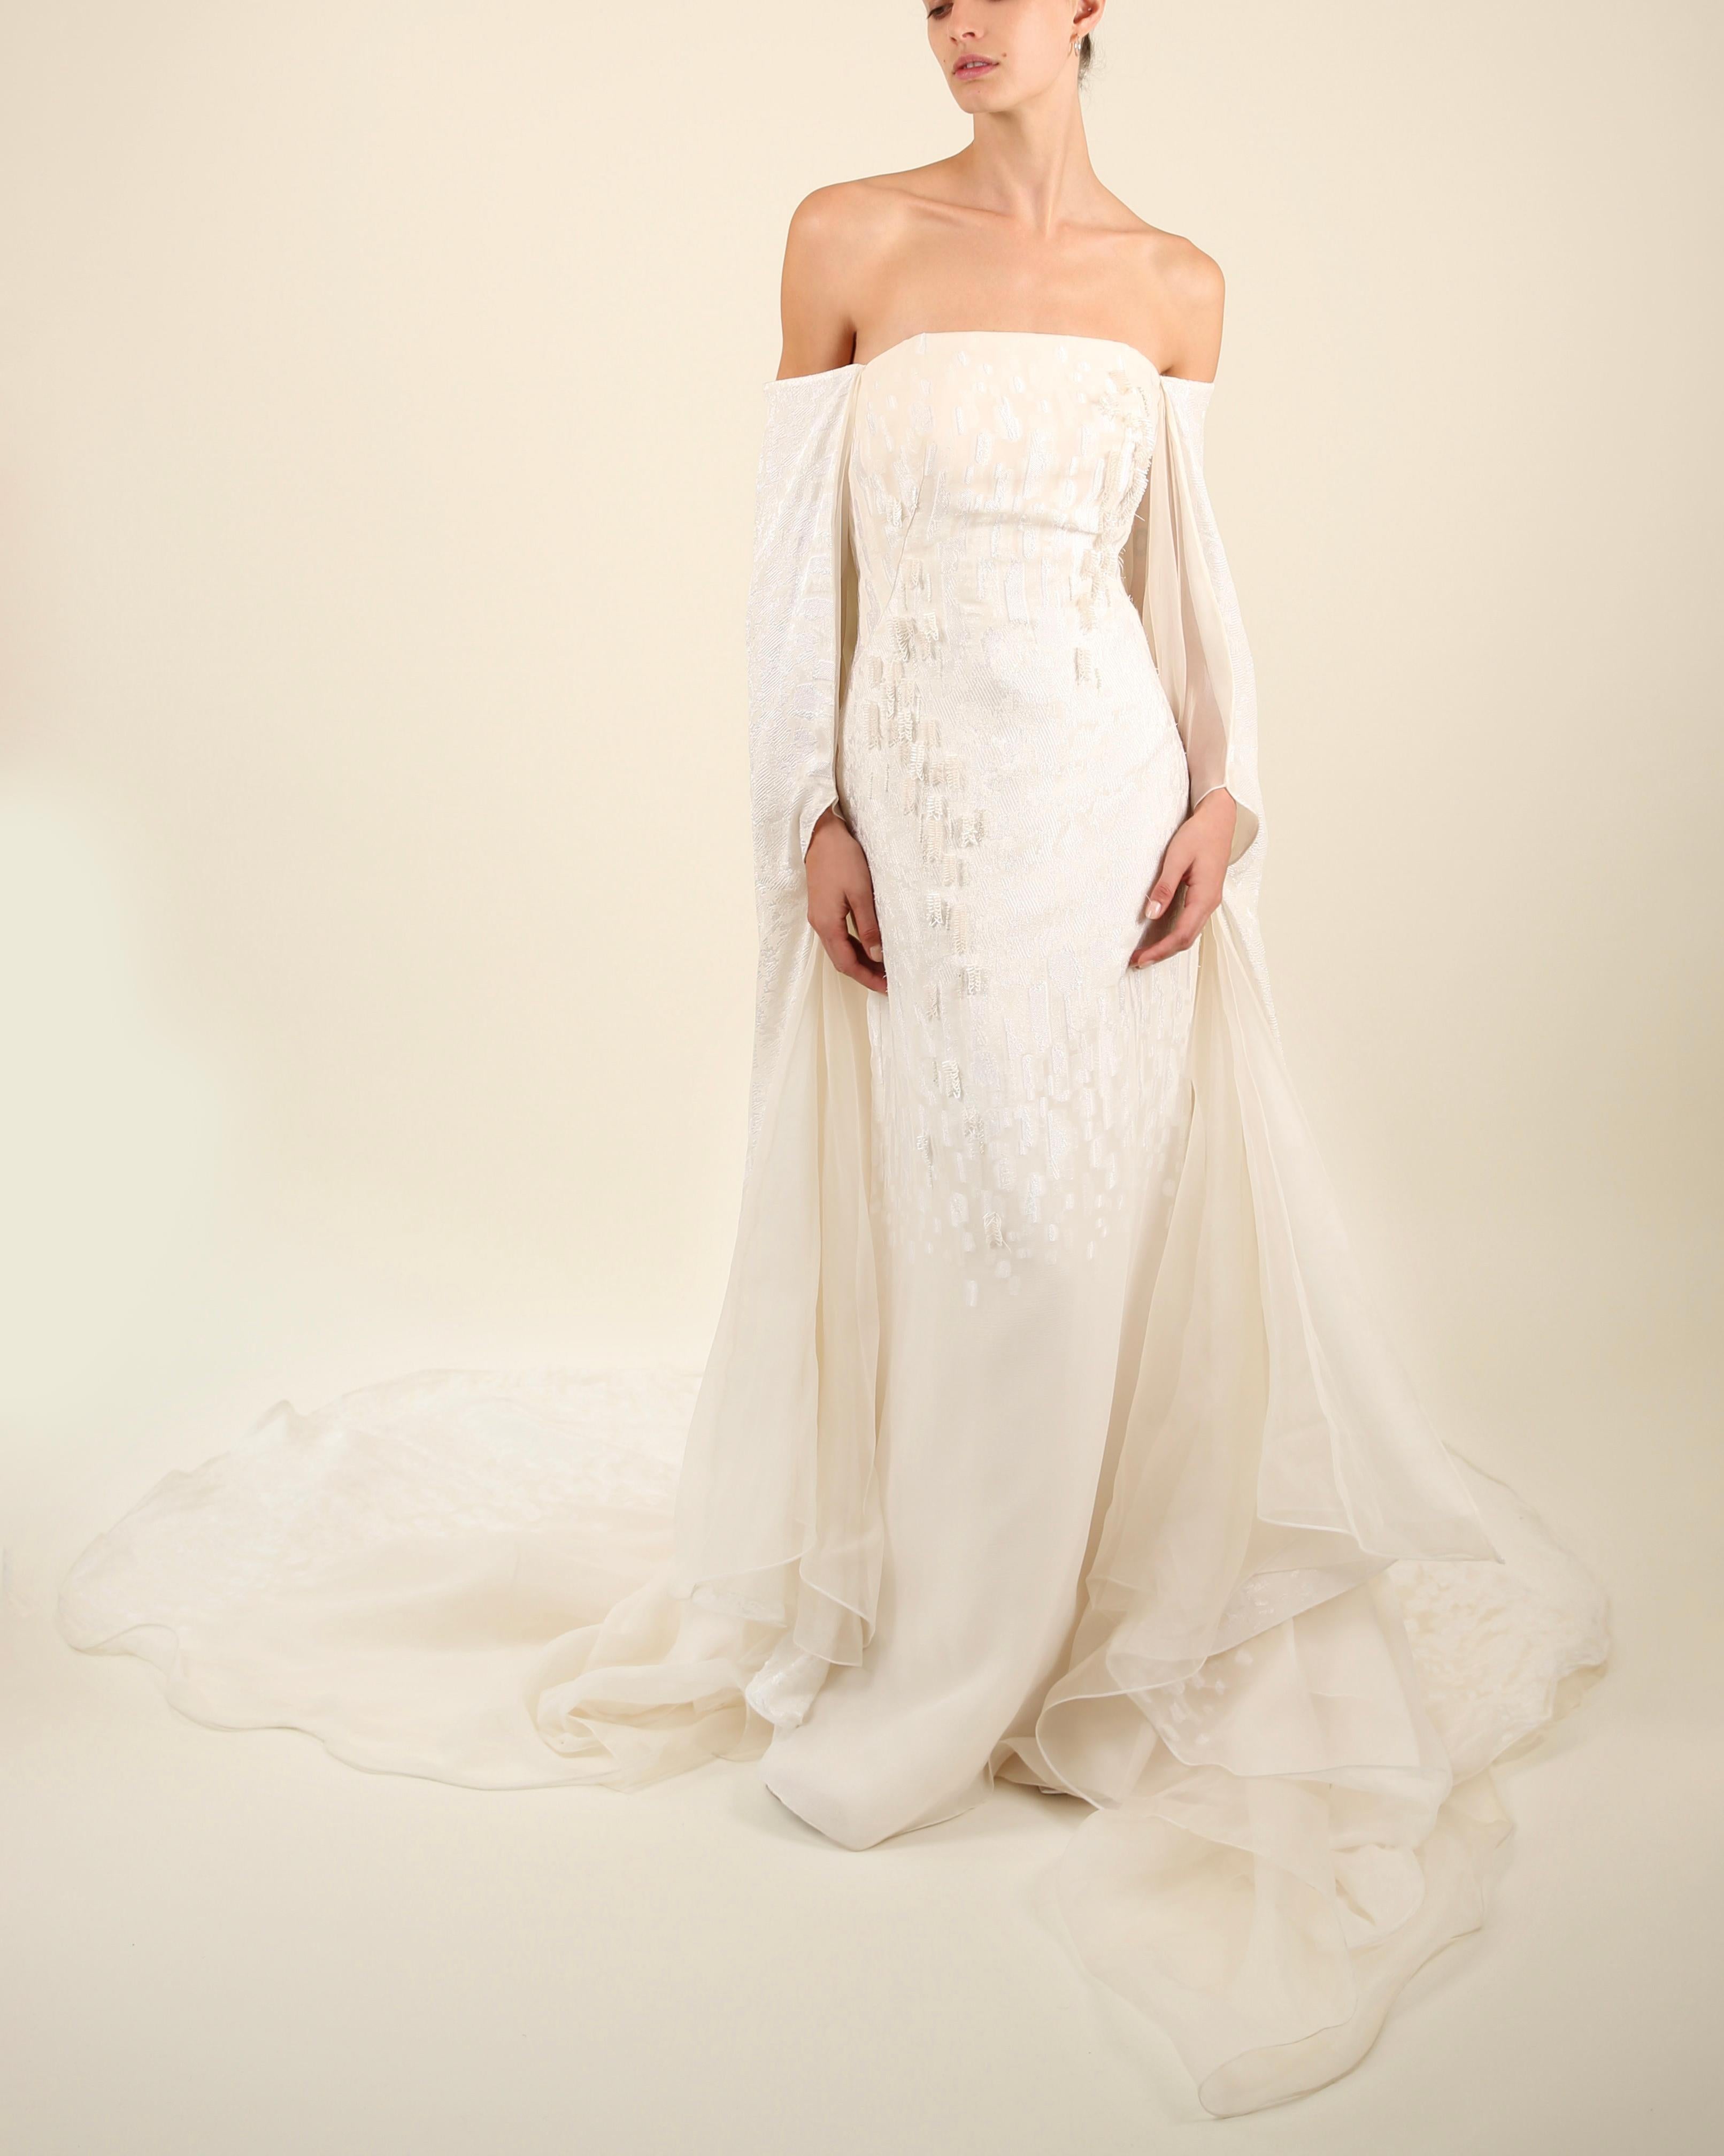 Maggie Sottero Wedding Dresses | Formalities by Tracina Fisher - Pamela  Leigh | Formalities